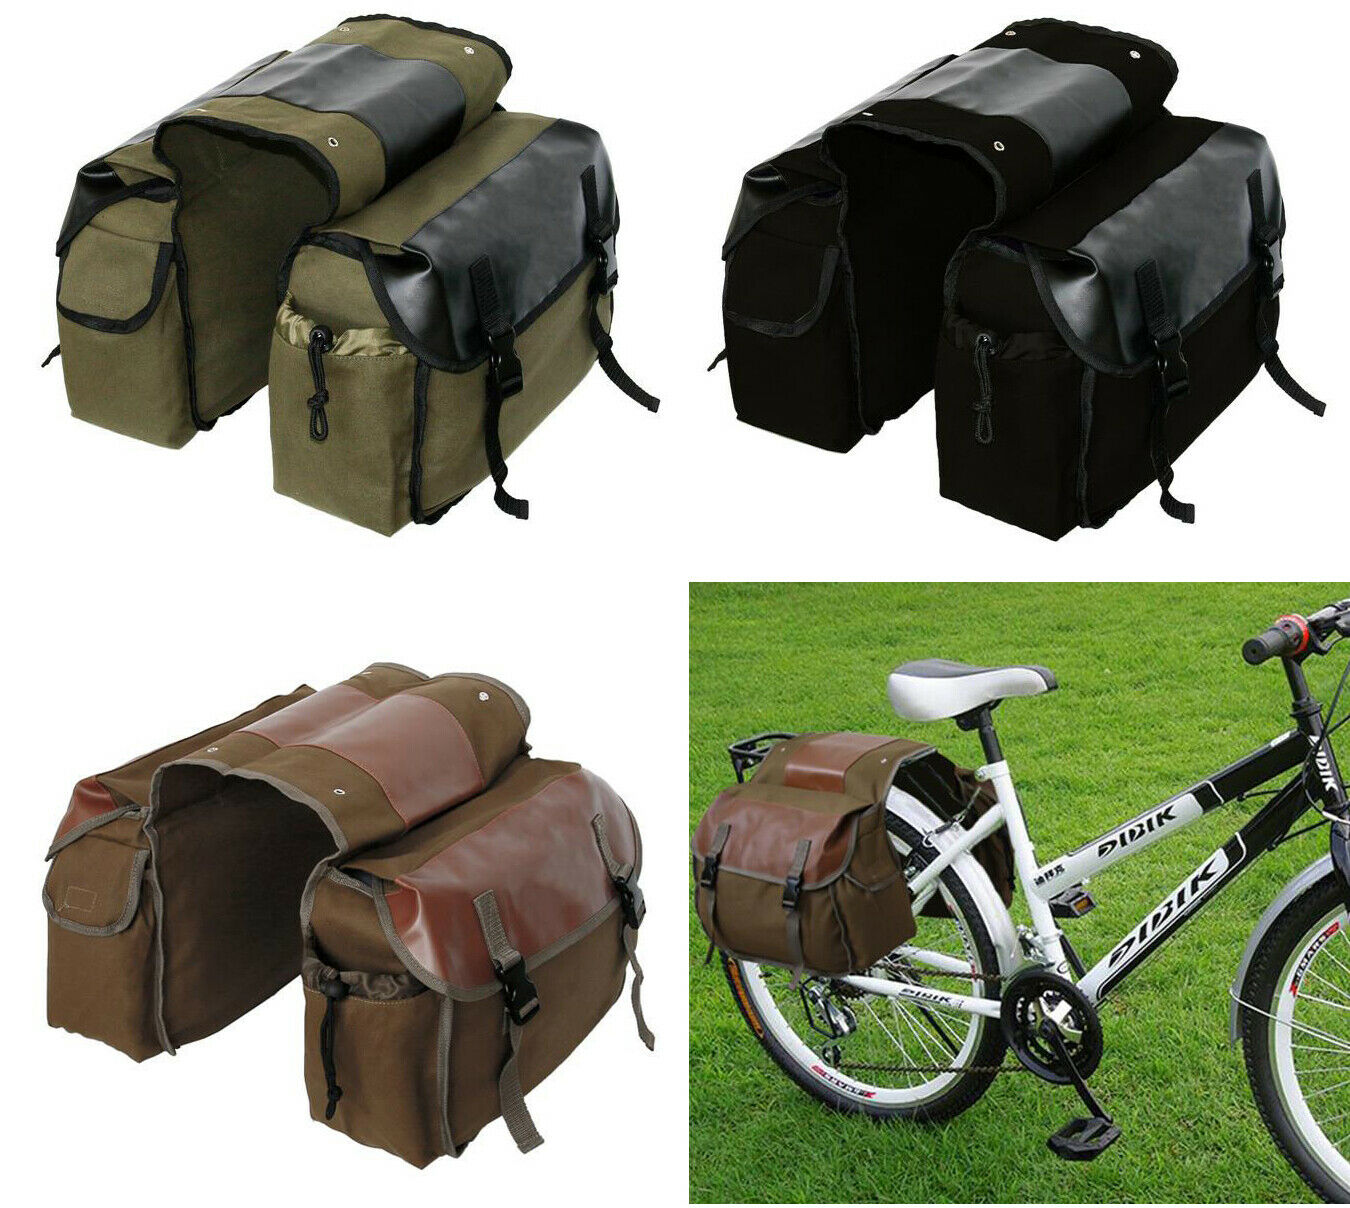 40L Bike Pannier Bag Bicycle Rear Back Seat Carrier Bag with Rain Cover